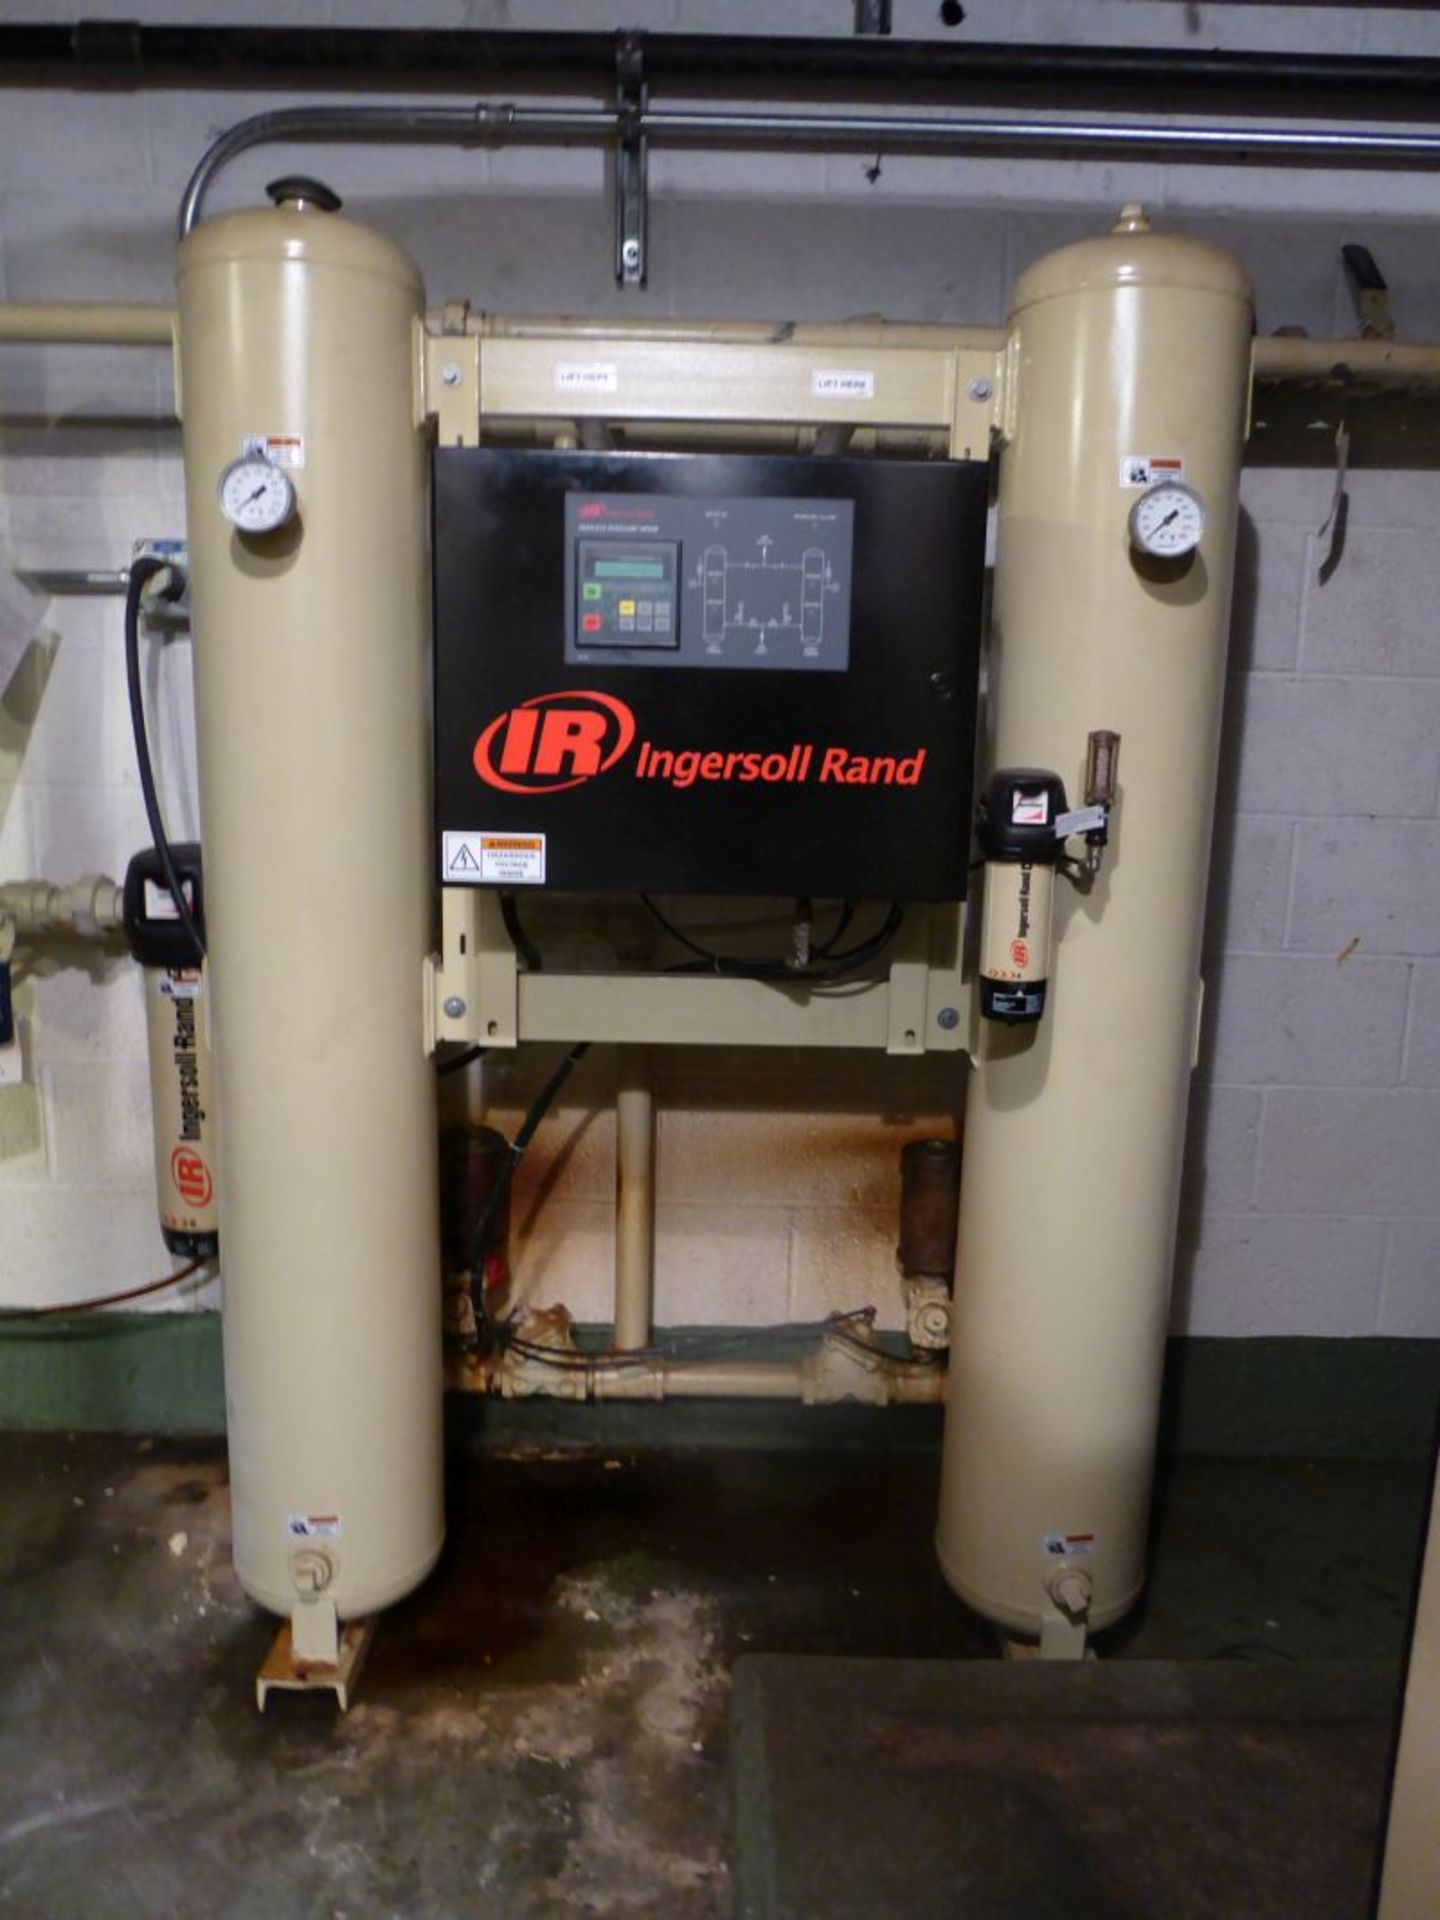 2007 Ingersoll Rand Refrigerated Air Dryer, Model: ML2001HOOAH, S/N: 283595-1, with (2) Ingersoll